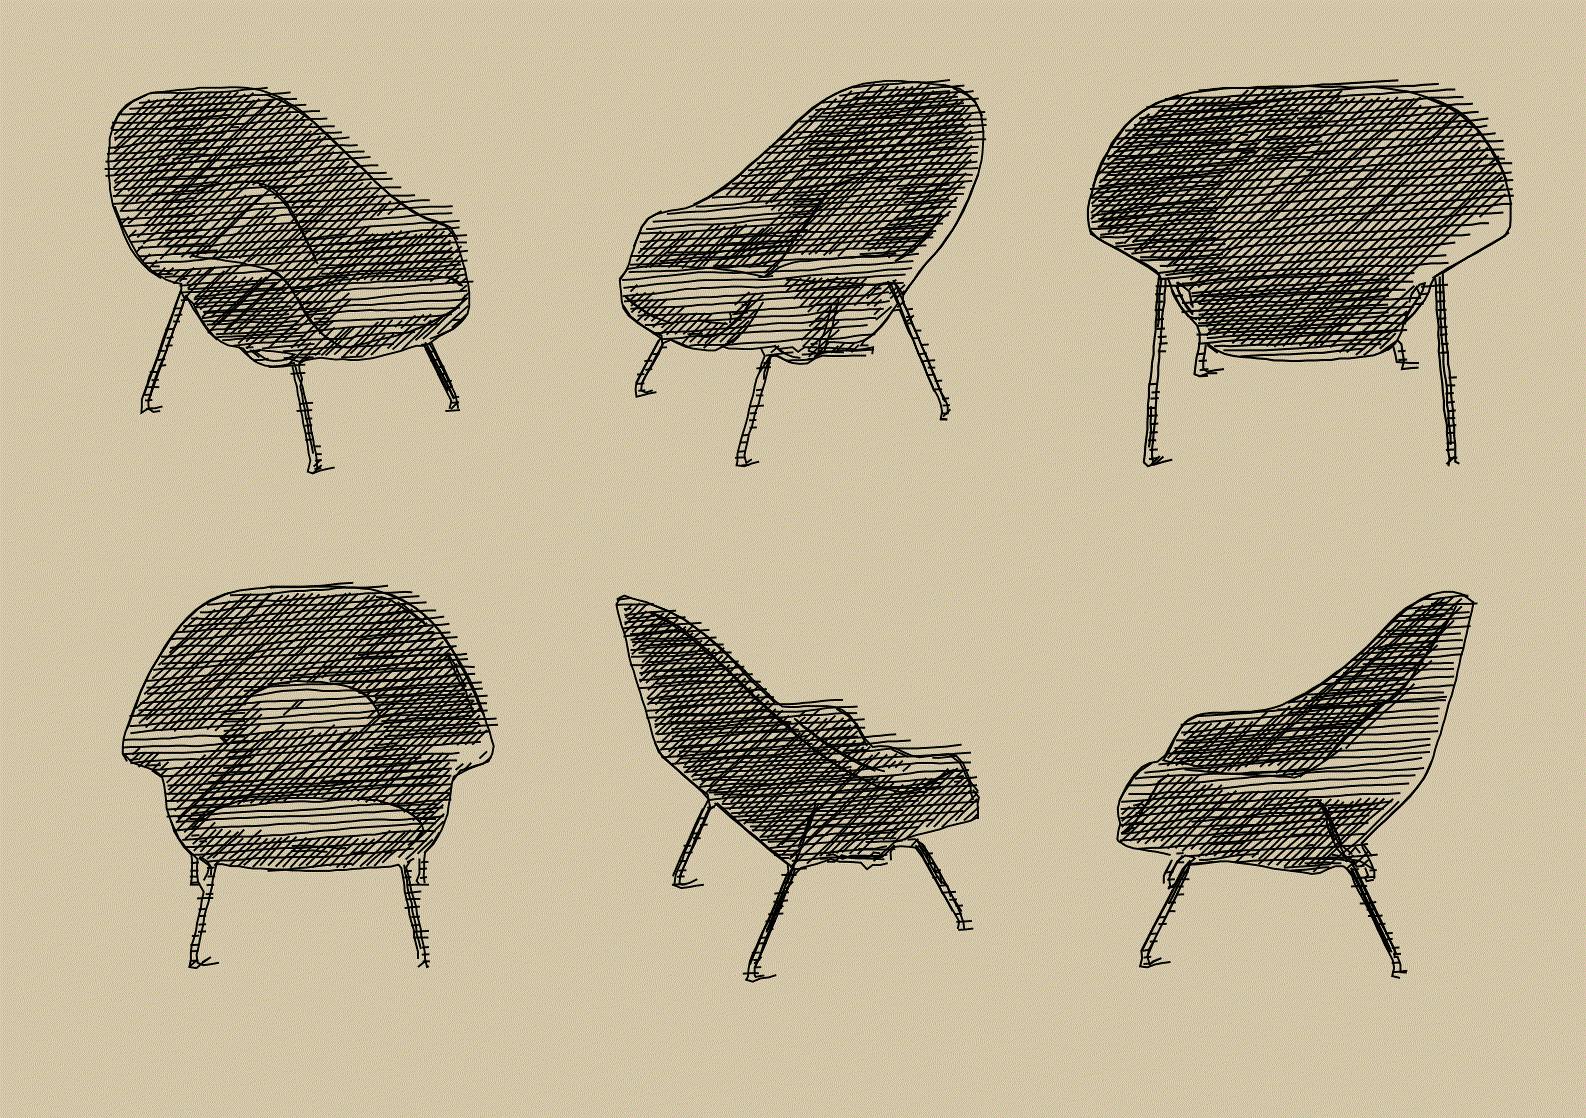 Drawing chairs with a pen plotter